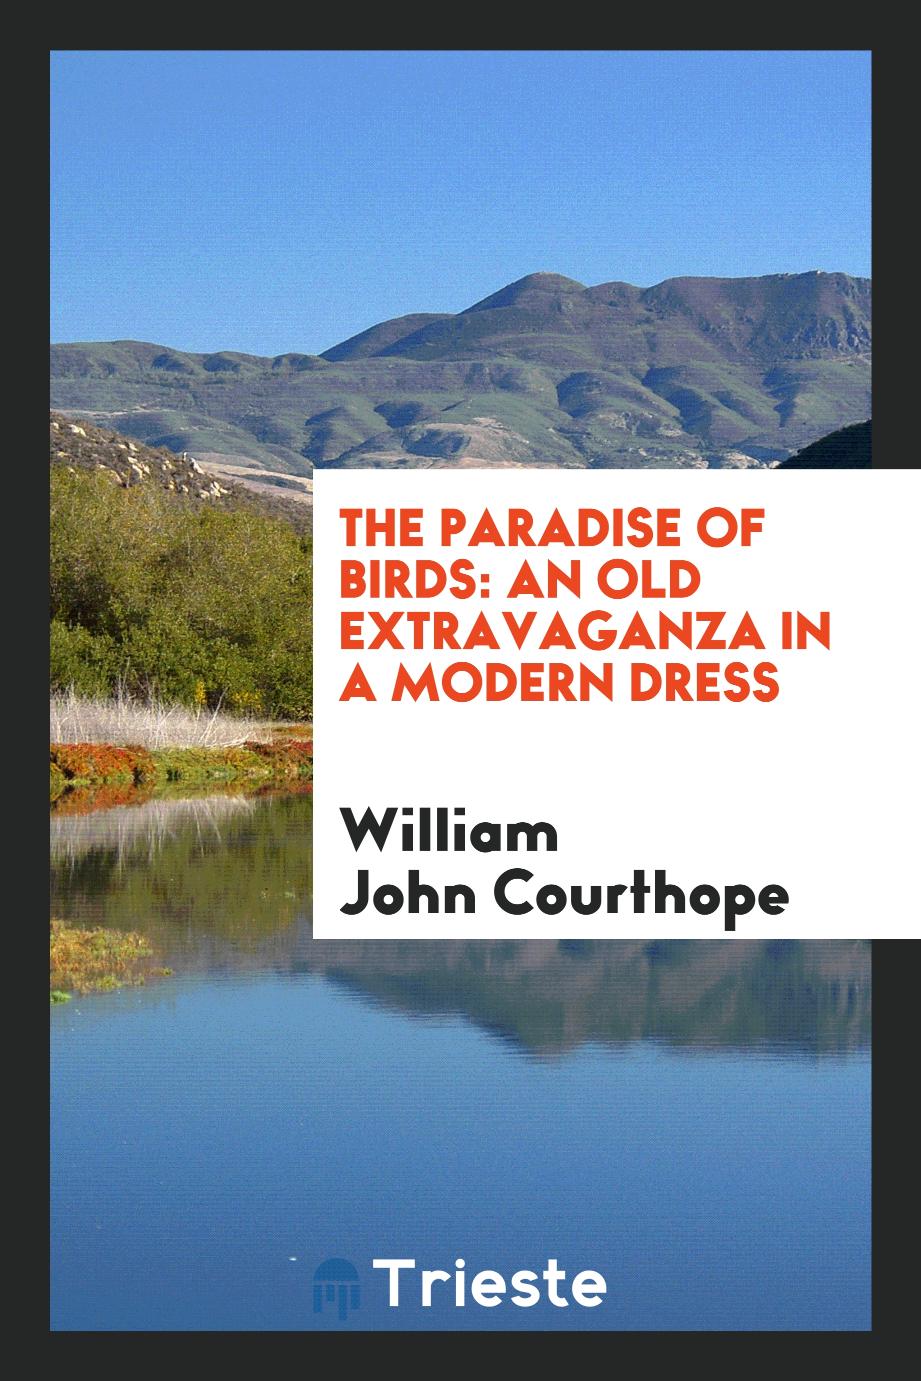 The Paradise of Birds: An Old Extravaganza in a Modern Dress